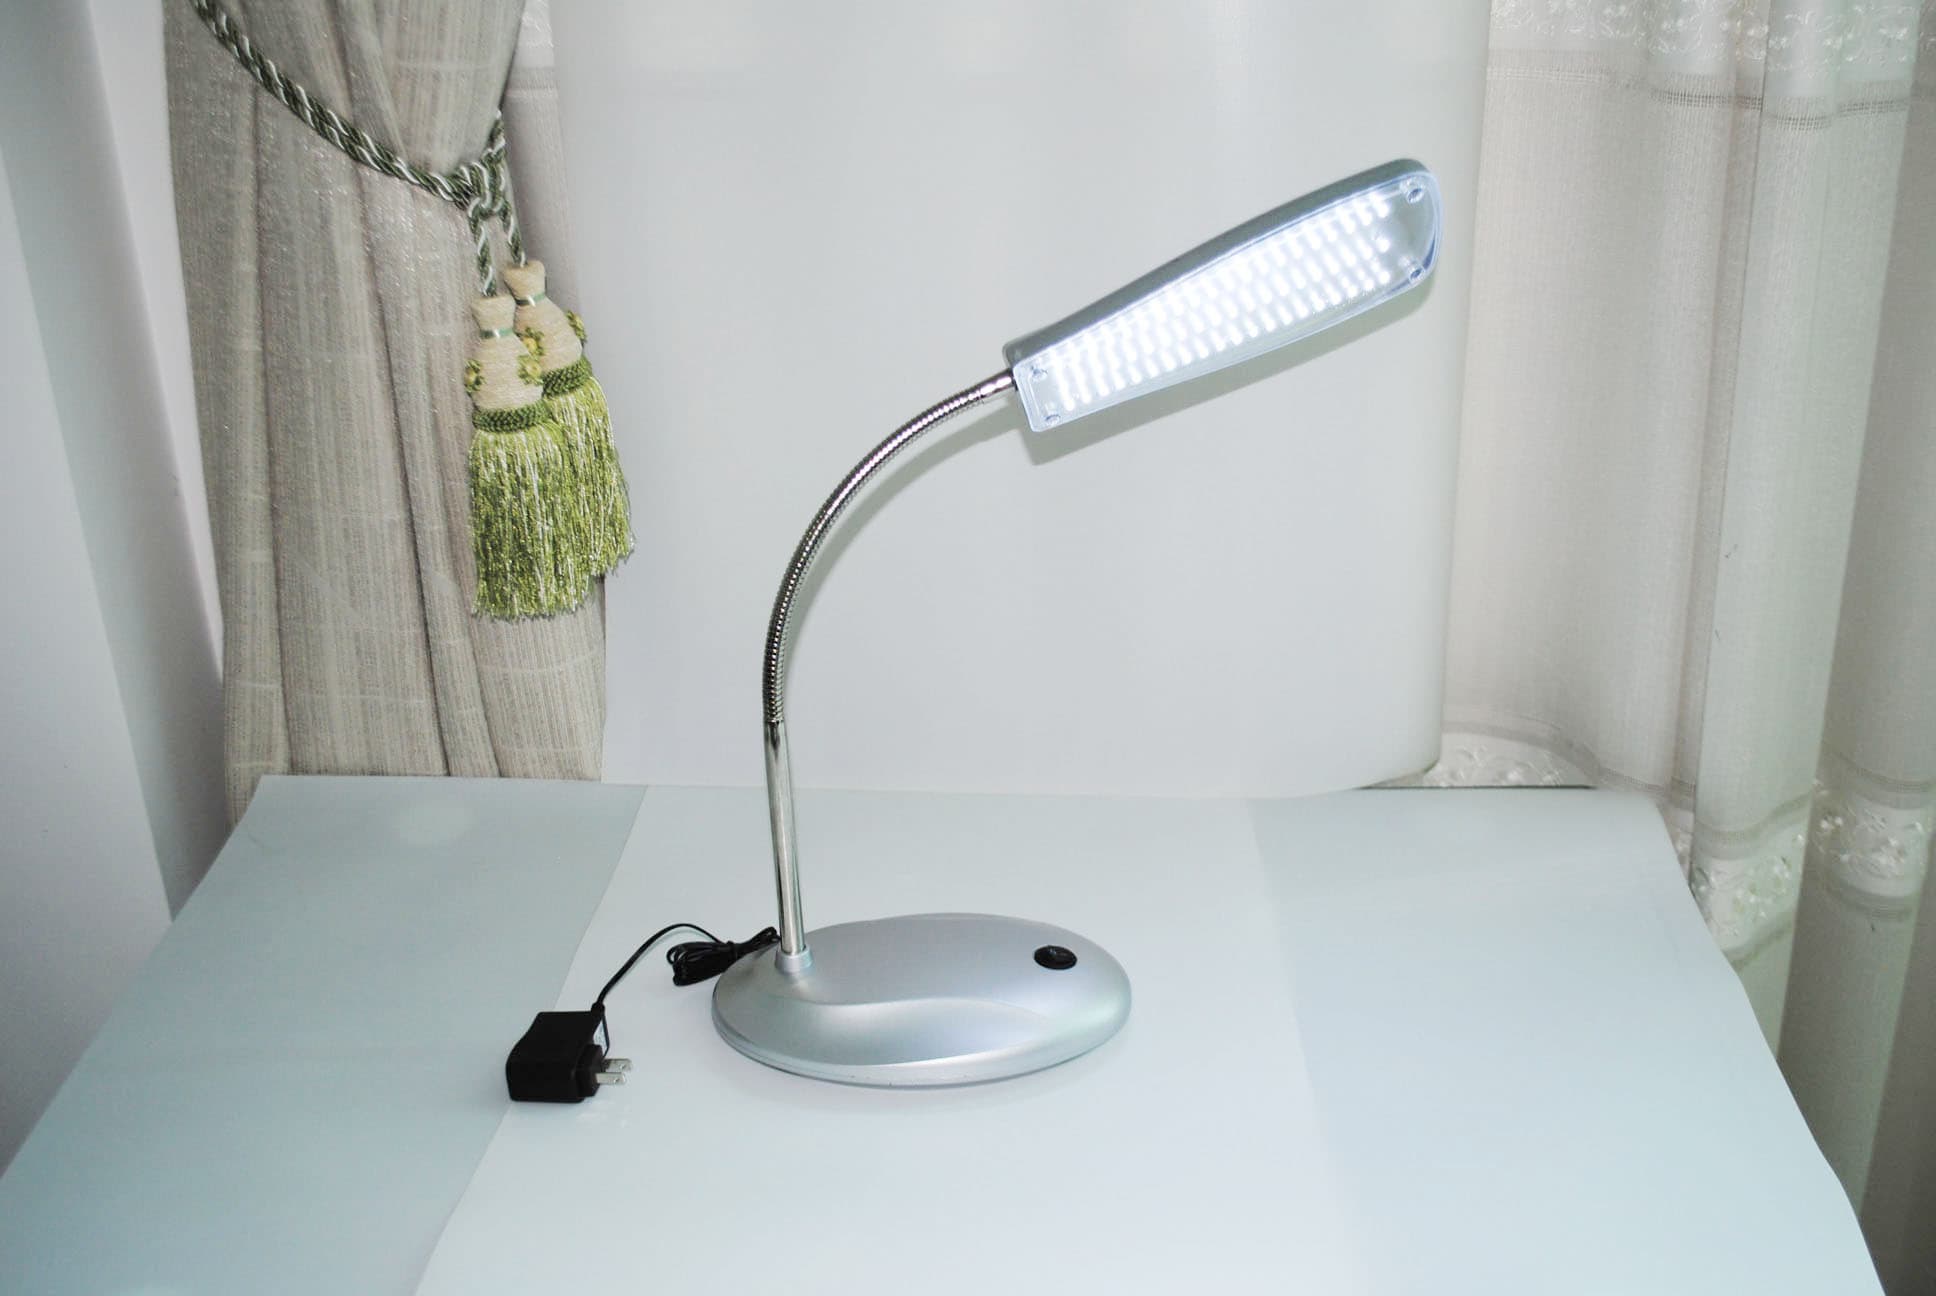 http://www.myled.com/catalogsearch/result/?q=desk+lamp